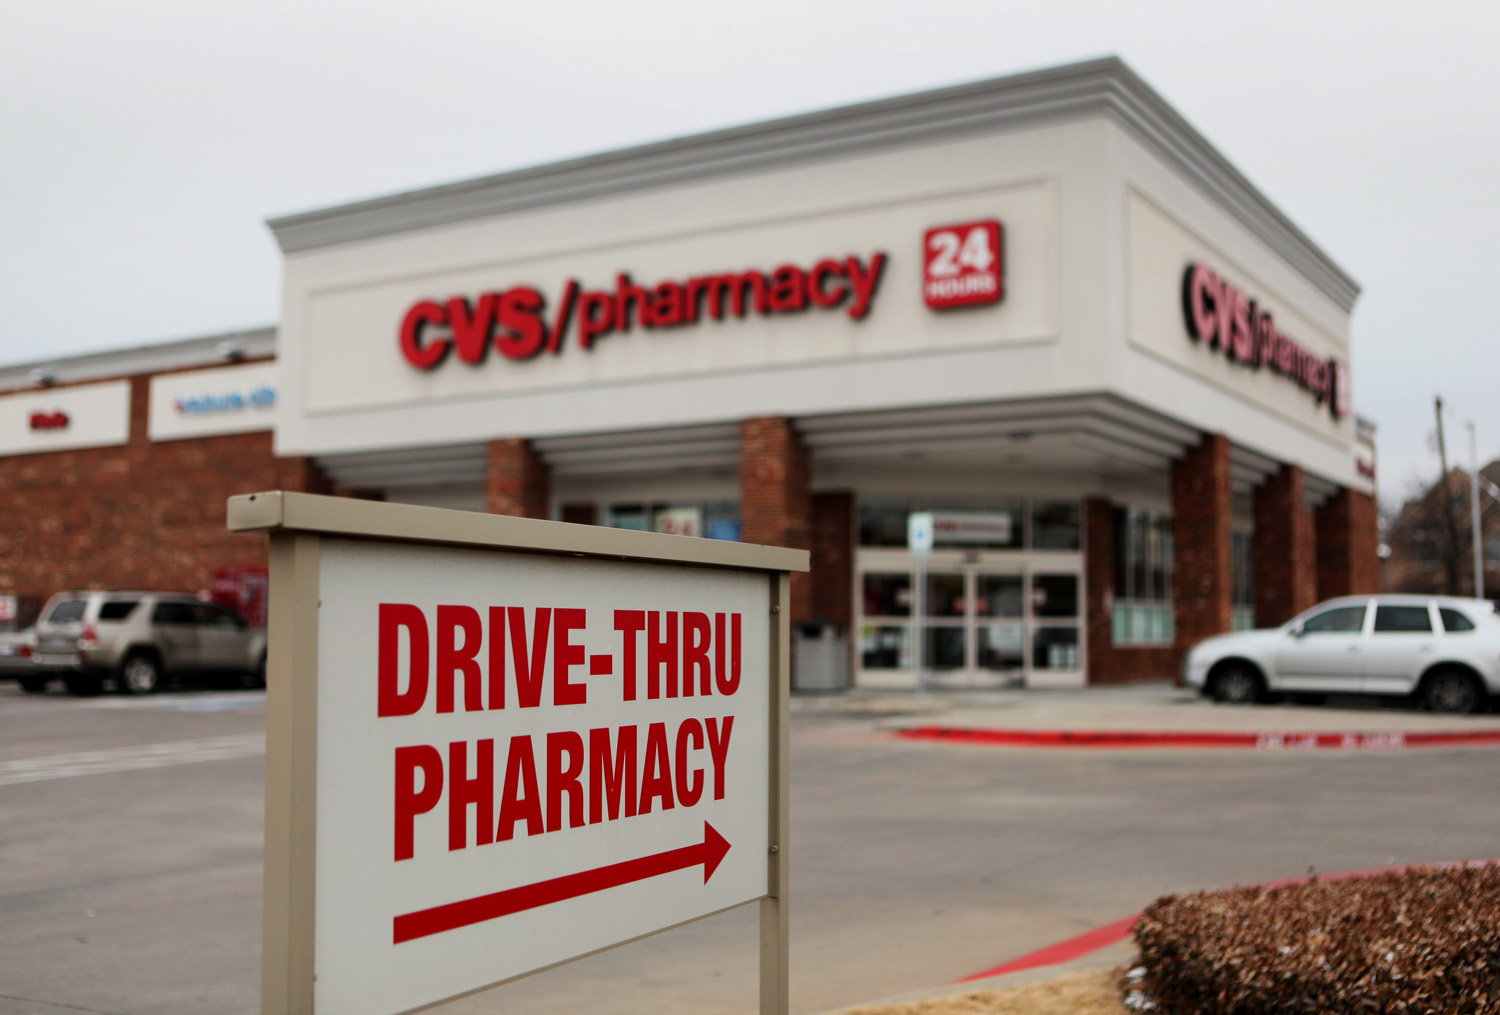 Stocks rose for CVS less than a week after announcing they would not be selling tobacco products anymore. (Ben Torres—Bloomberg/Getty Images)